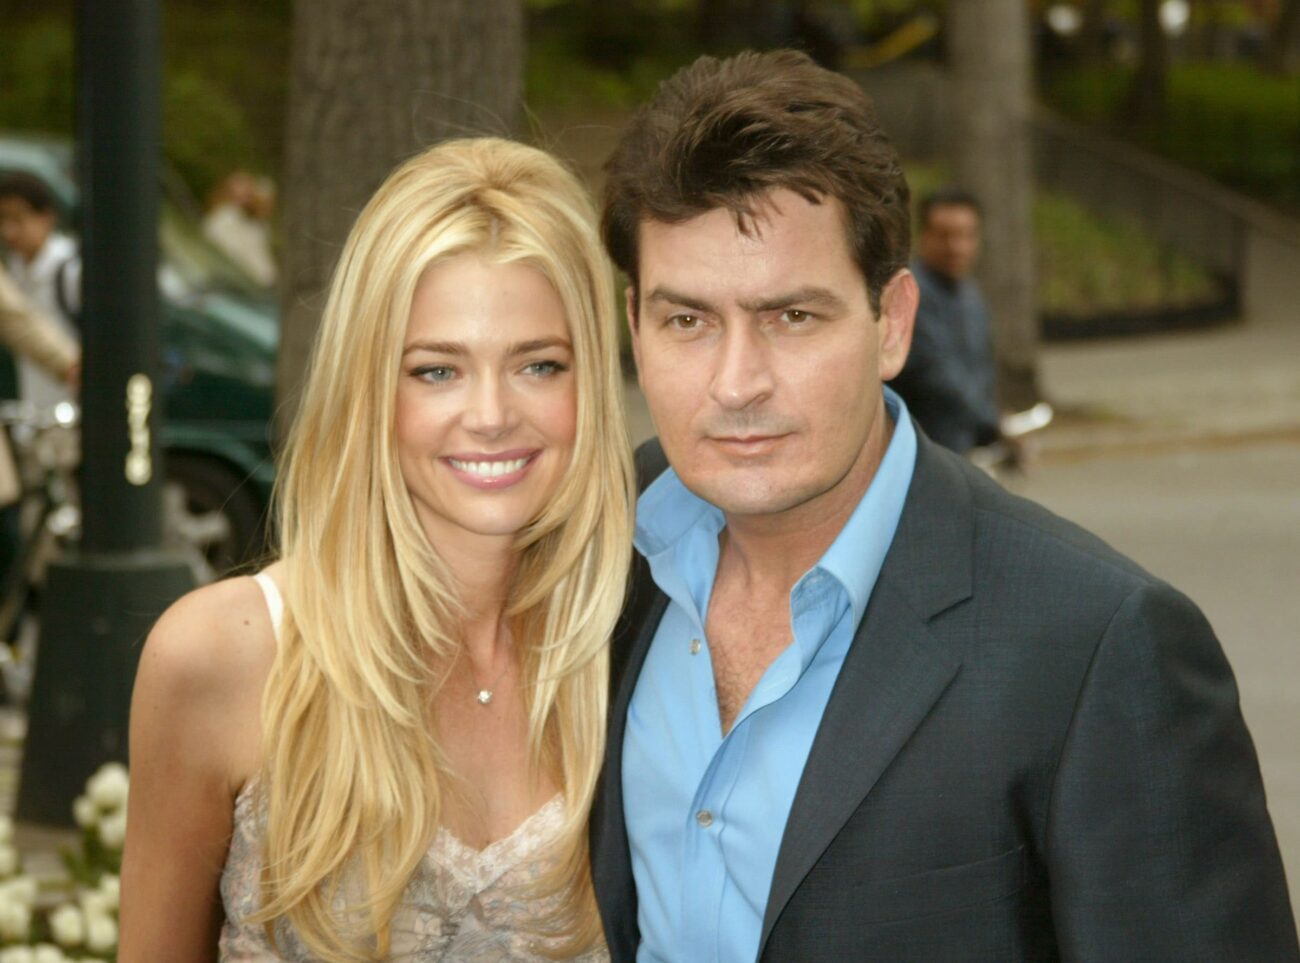 The drama continues for Denise Richards and Charlie Sheen. Since 2000, the couple has been in the spotlight. Now, a new court ruling adds to the chaos.